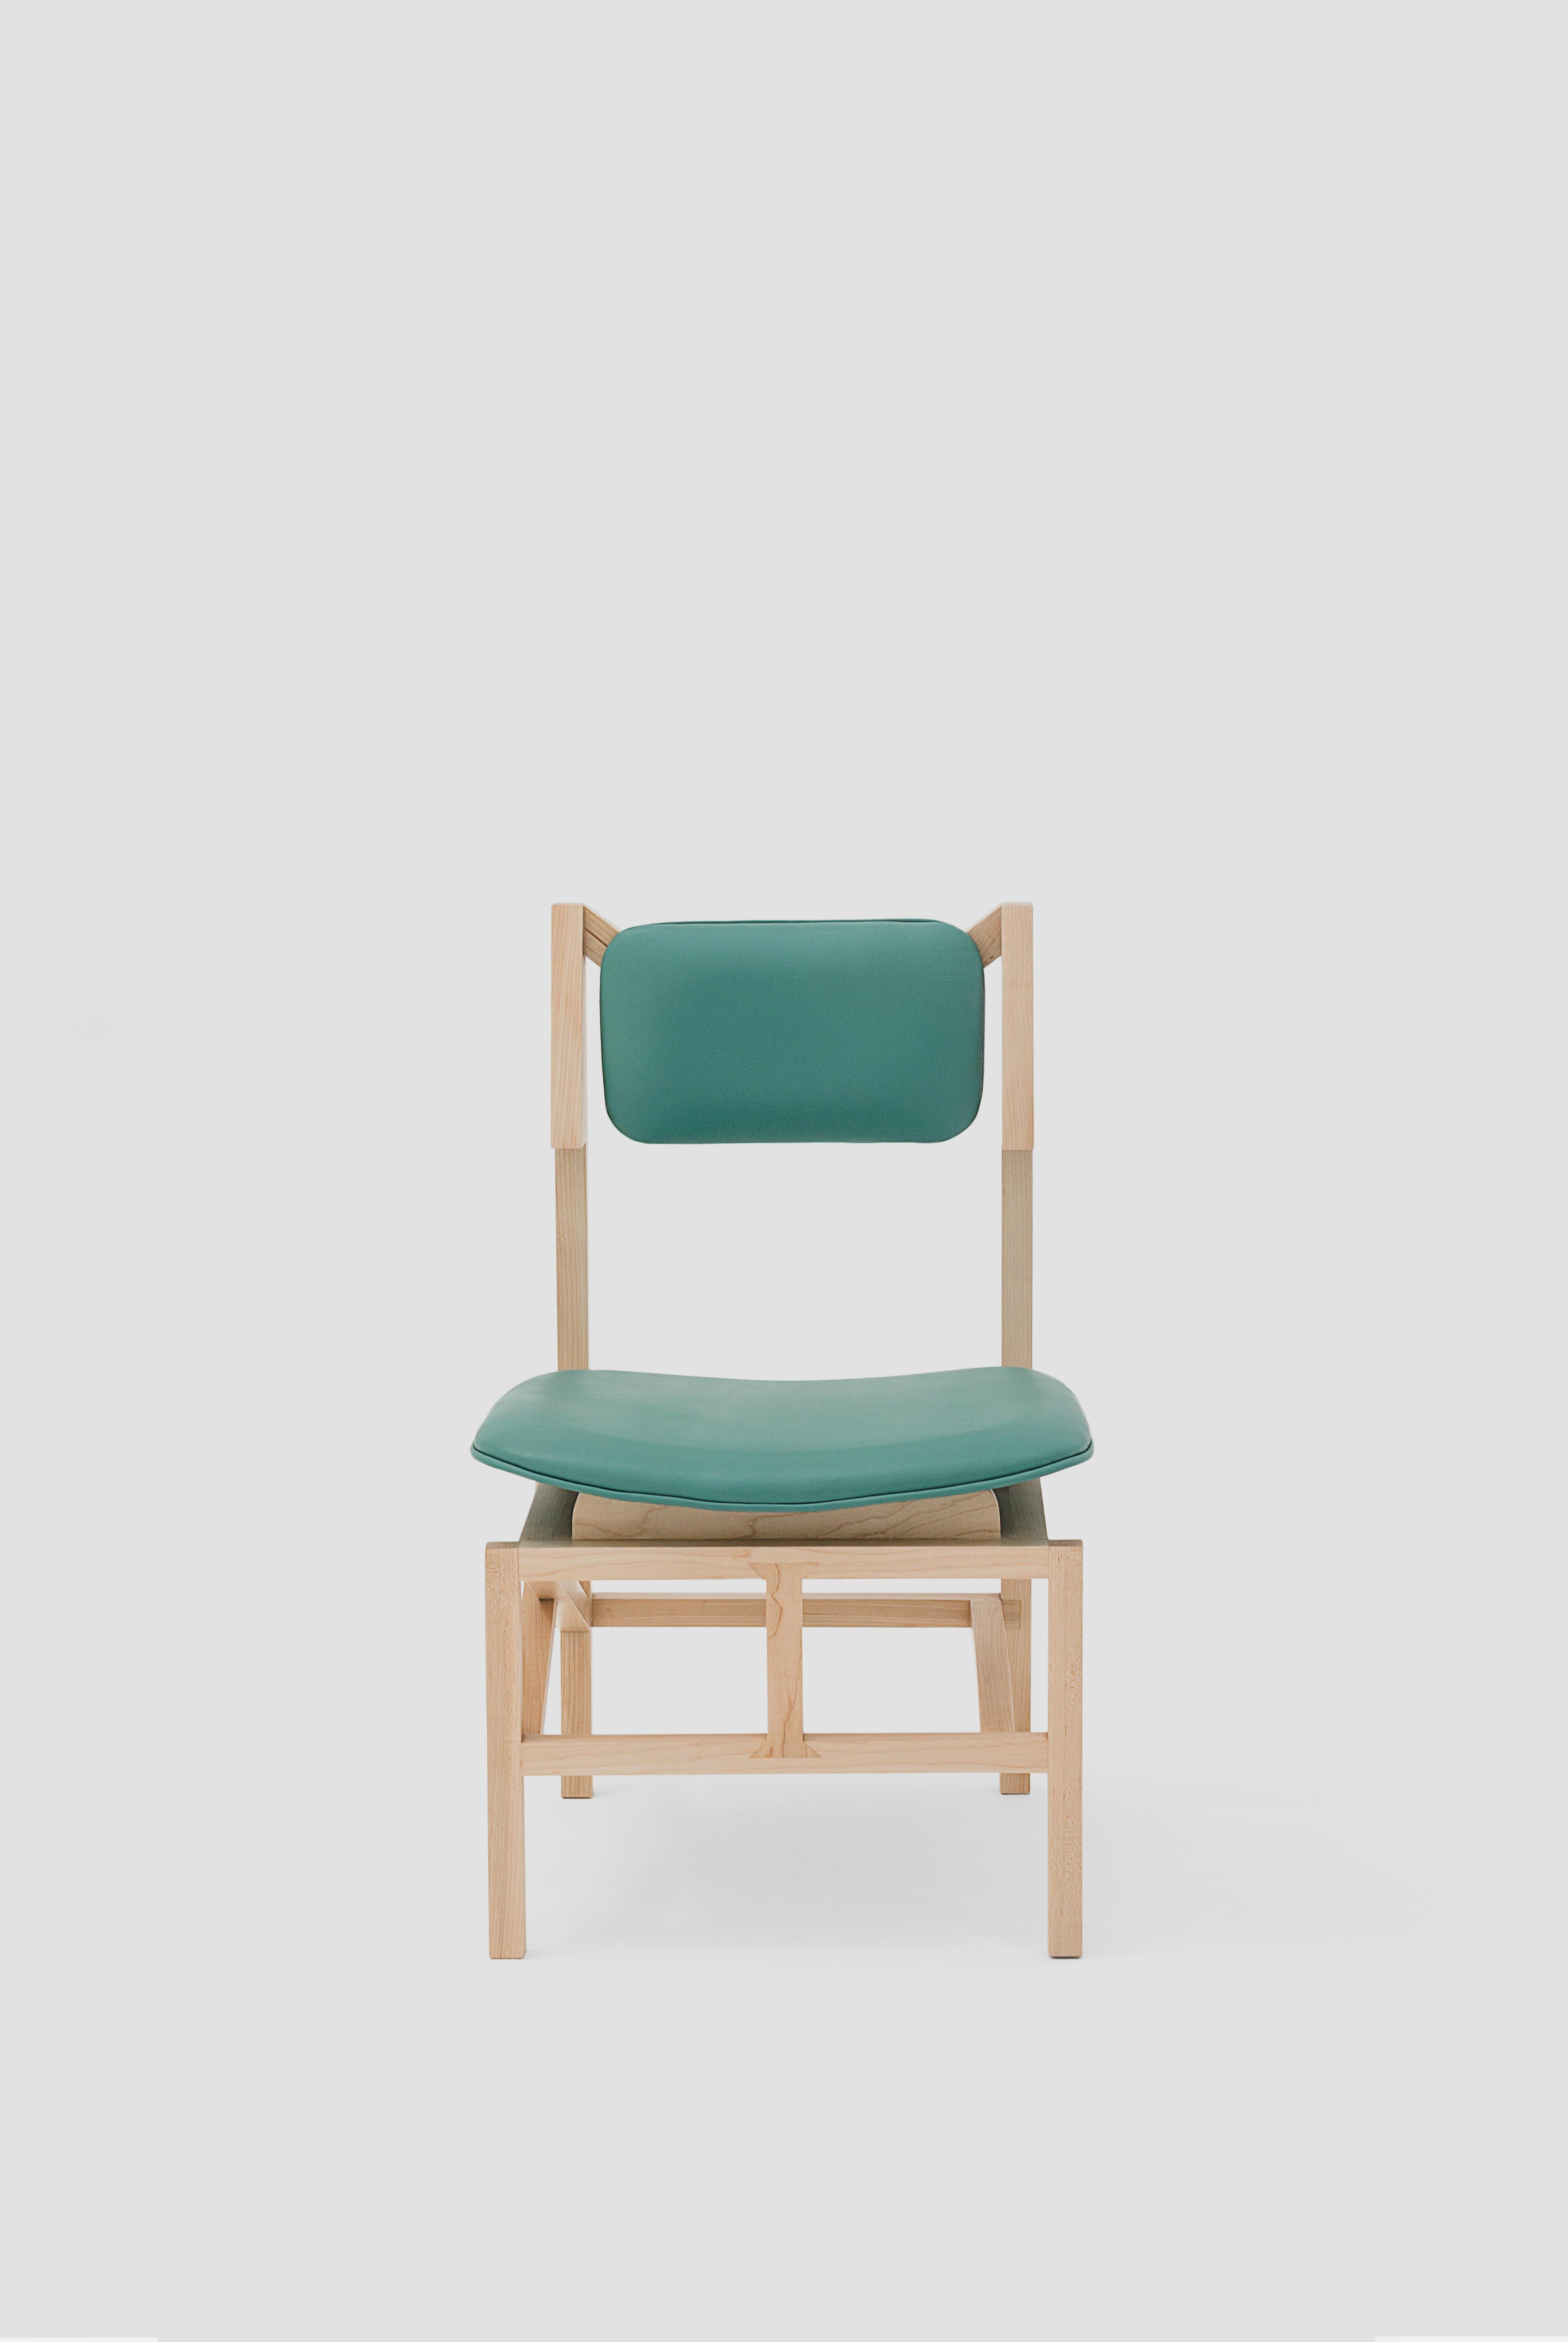 Green Mexico chair by Marco Rountree
Dimensions: D 53 x W 57 x H 92 cm
Materials: walnut wood, leather.

Chair made of walnut and leather.

Marco Rountree
He defines his practice as the free experimentation of drawing in any material. Through